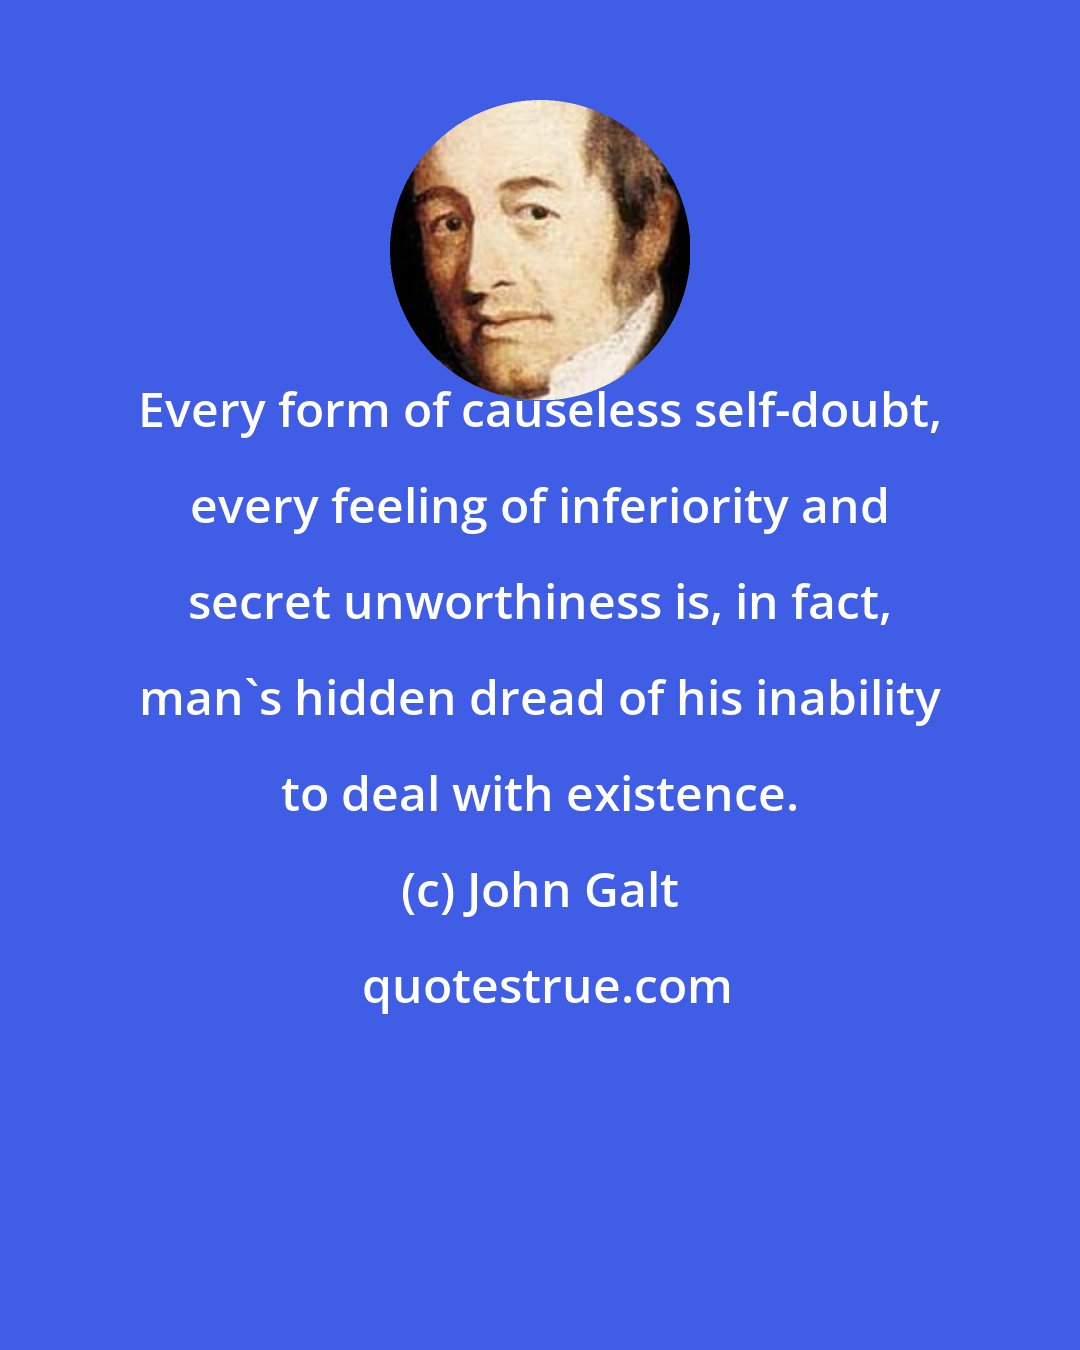 John Galt: Every form of causeless self-doubt, every feeling of inferiority and secret unworthiness is, in fact, man's hidden dread of his inability to deal with existence.